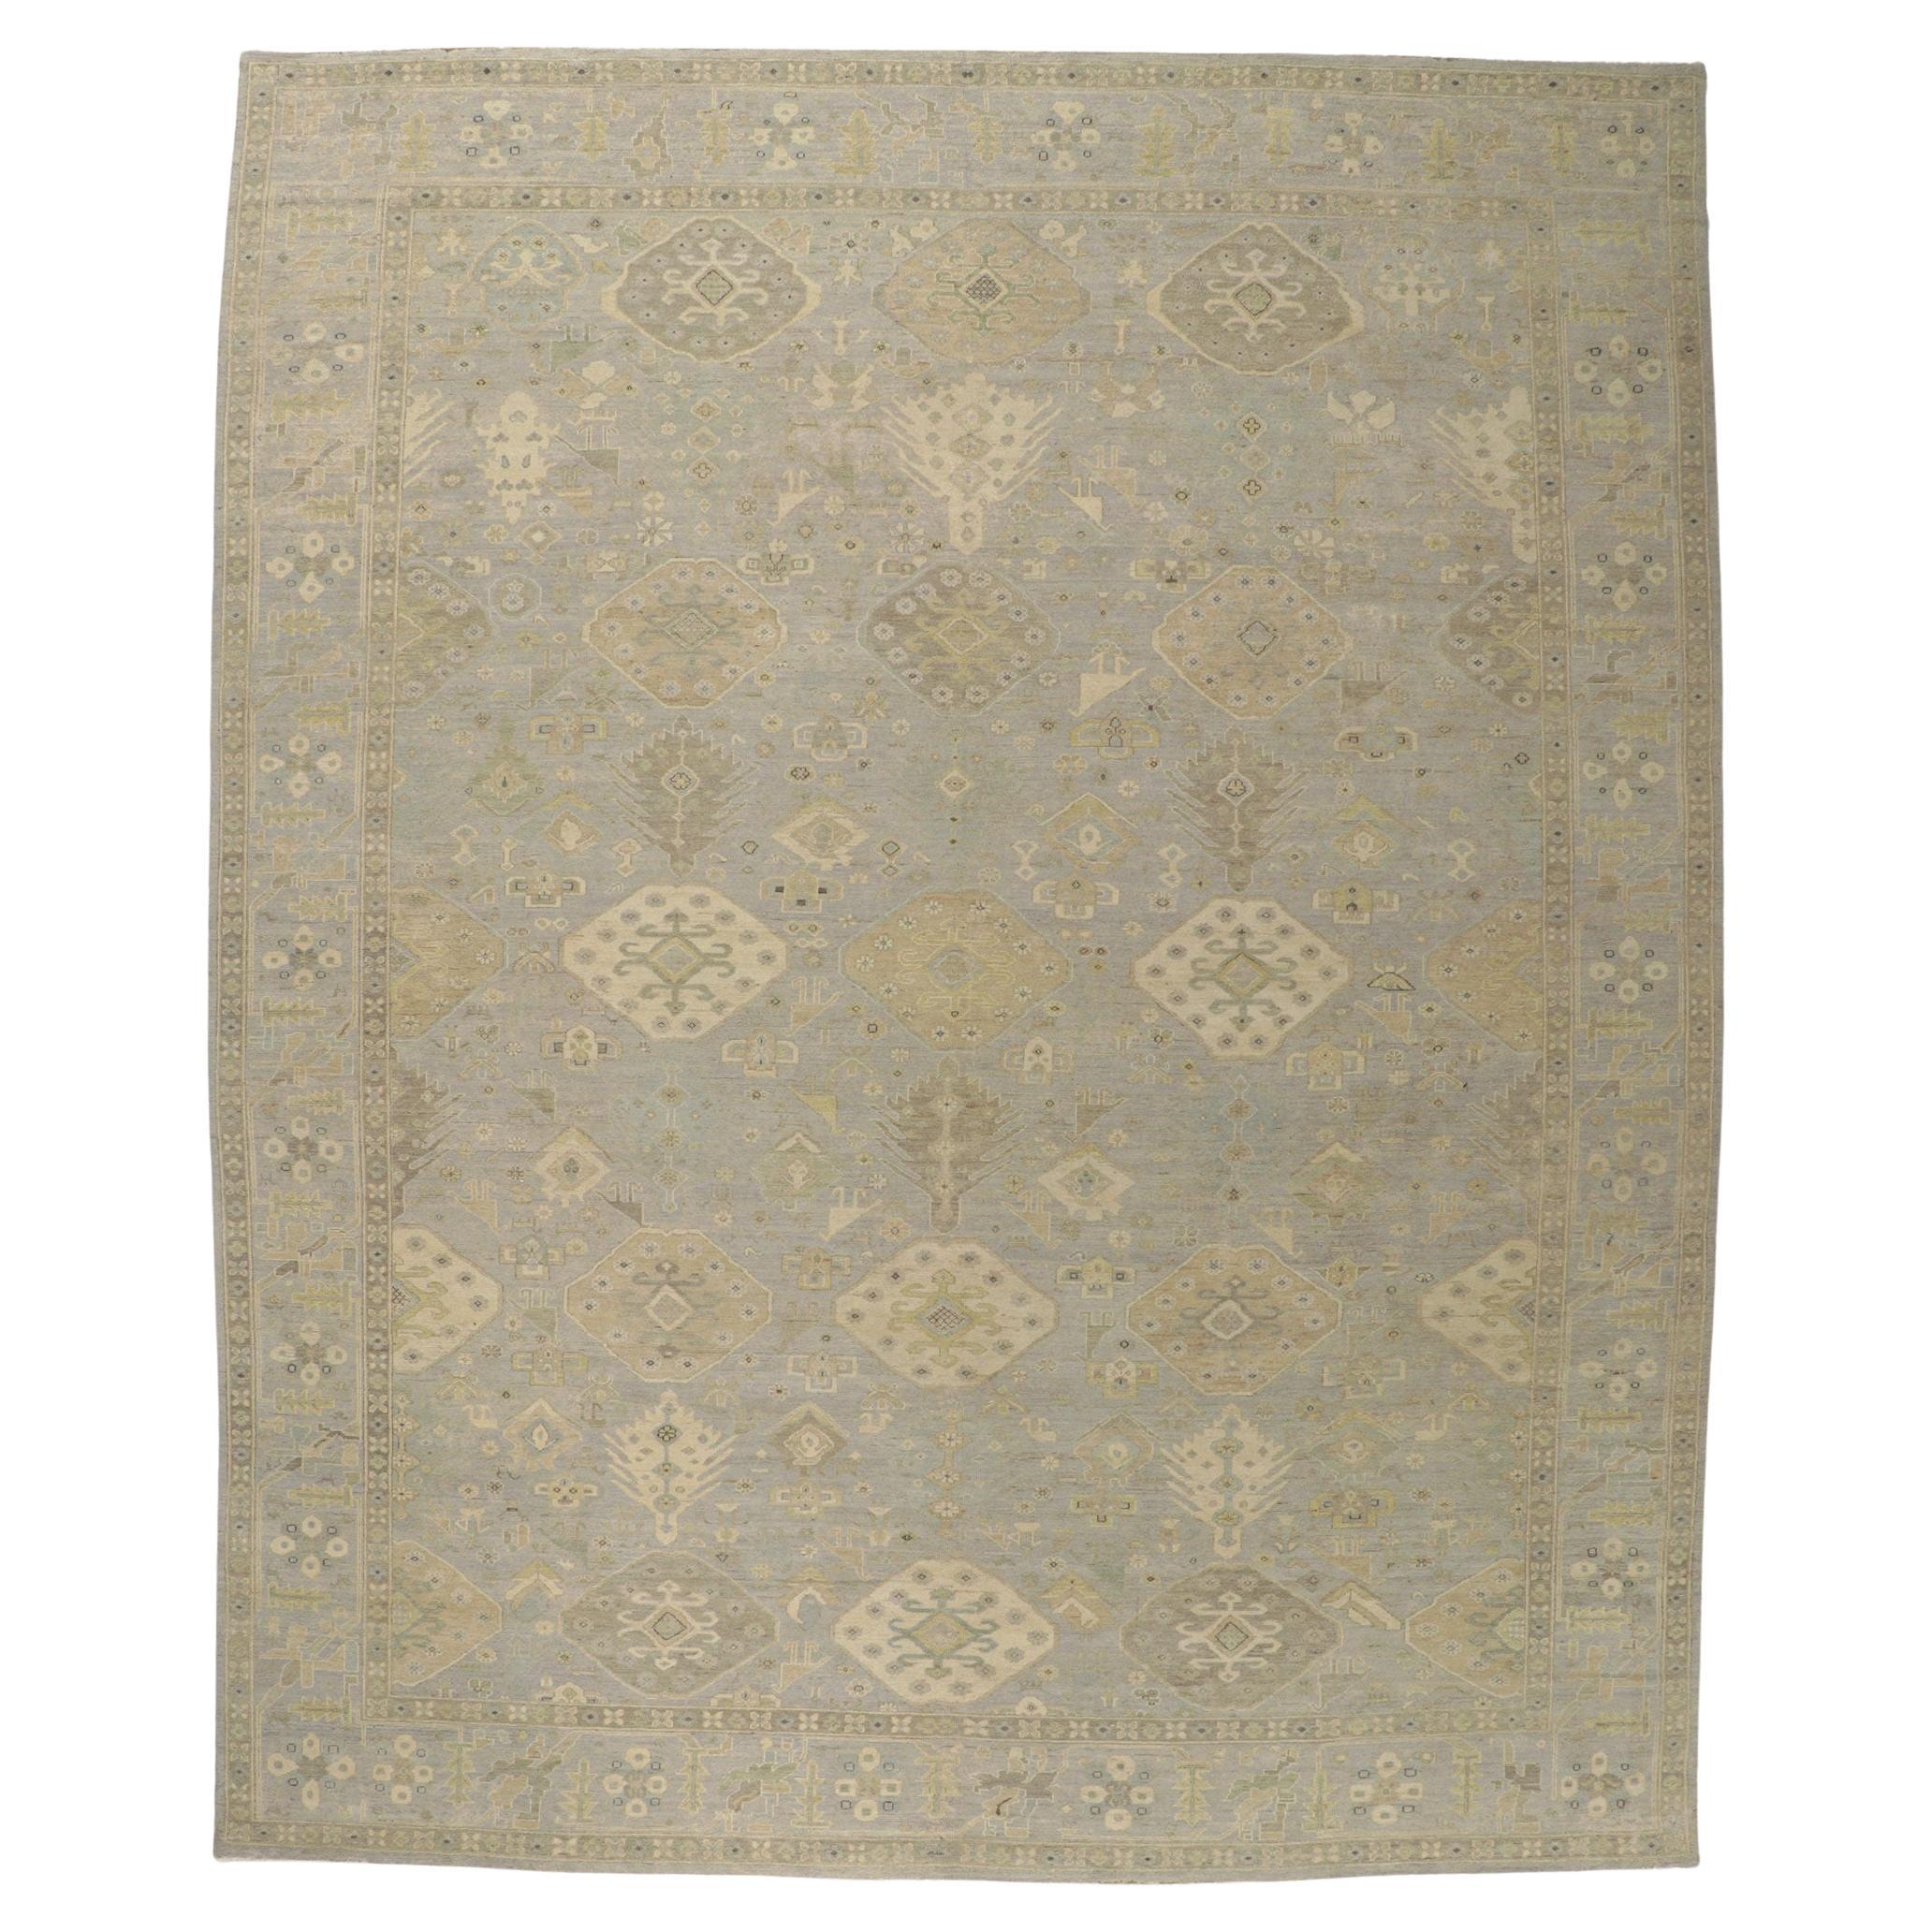 New Distressed Oushak Rug with Vintage Style For Sale